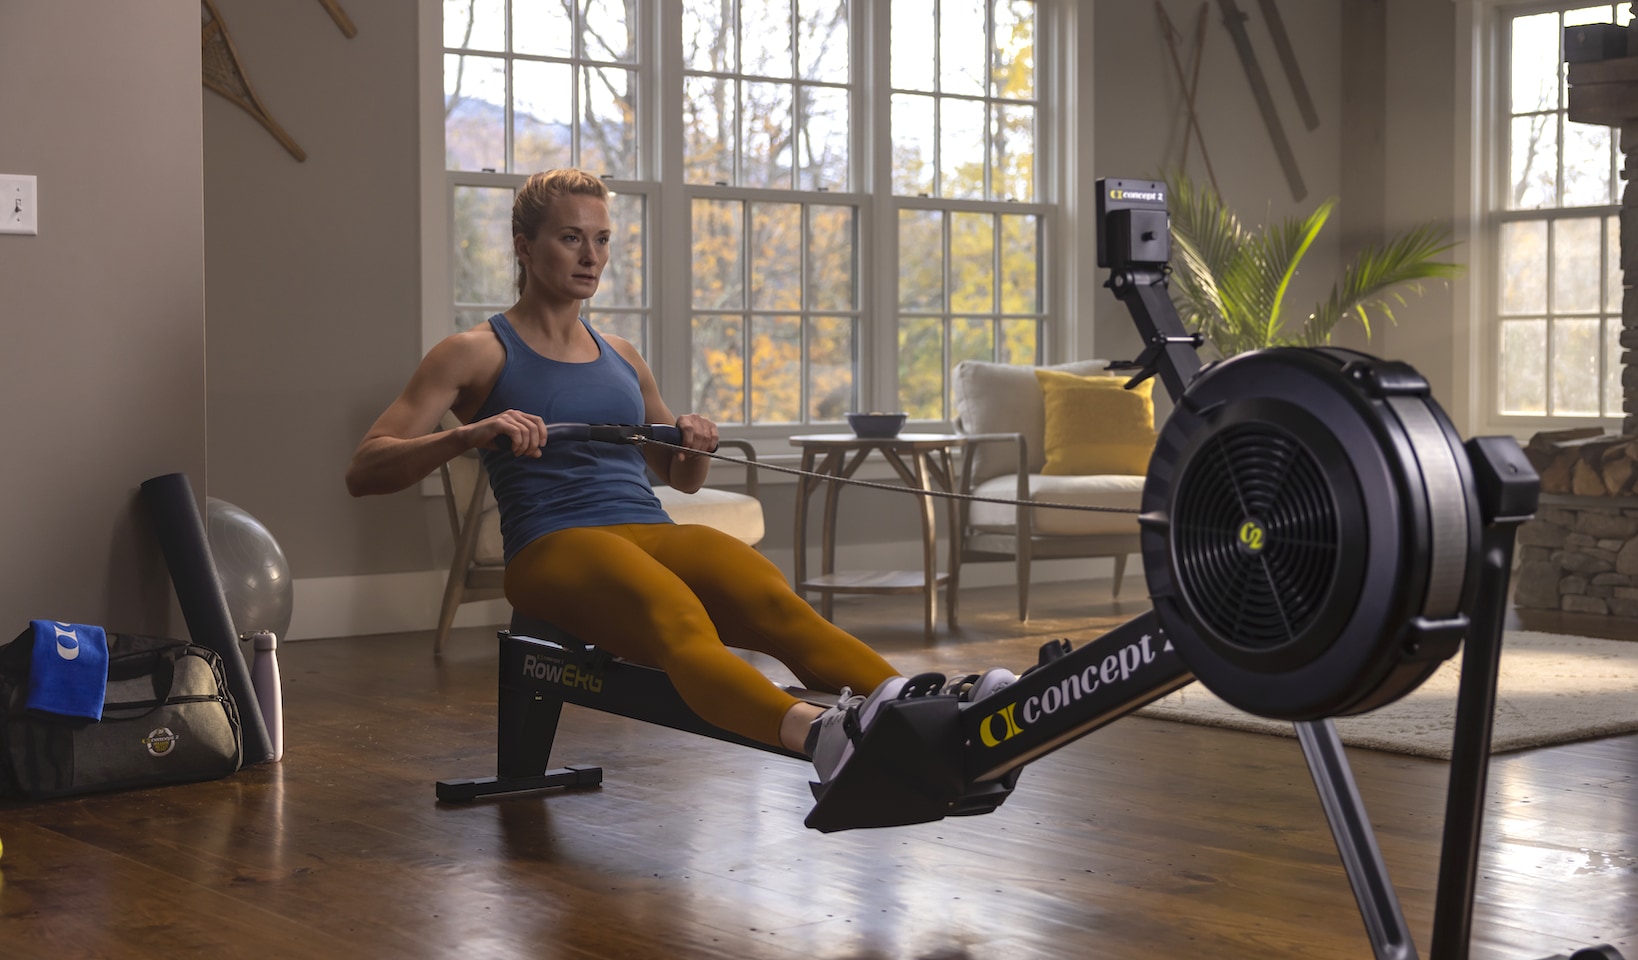 The Concept 2 Rower with female rowing